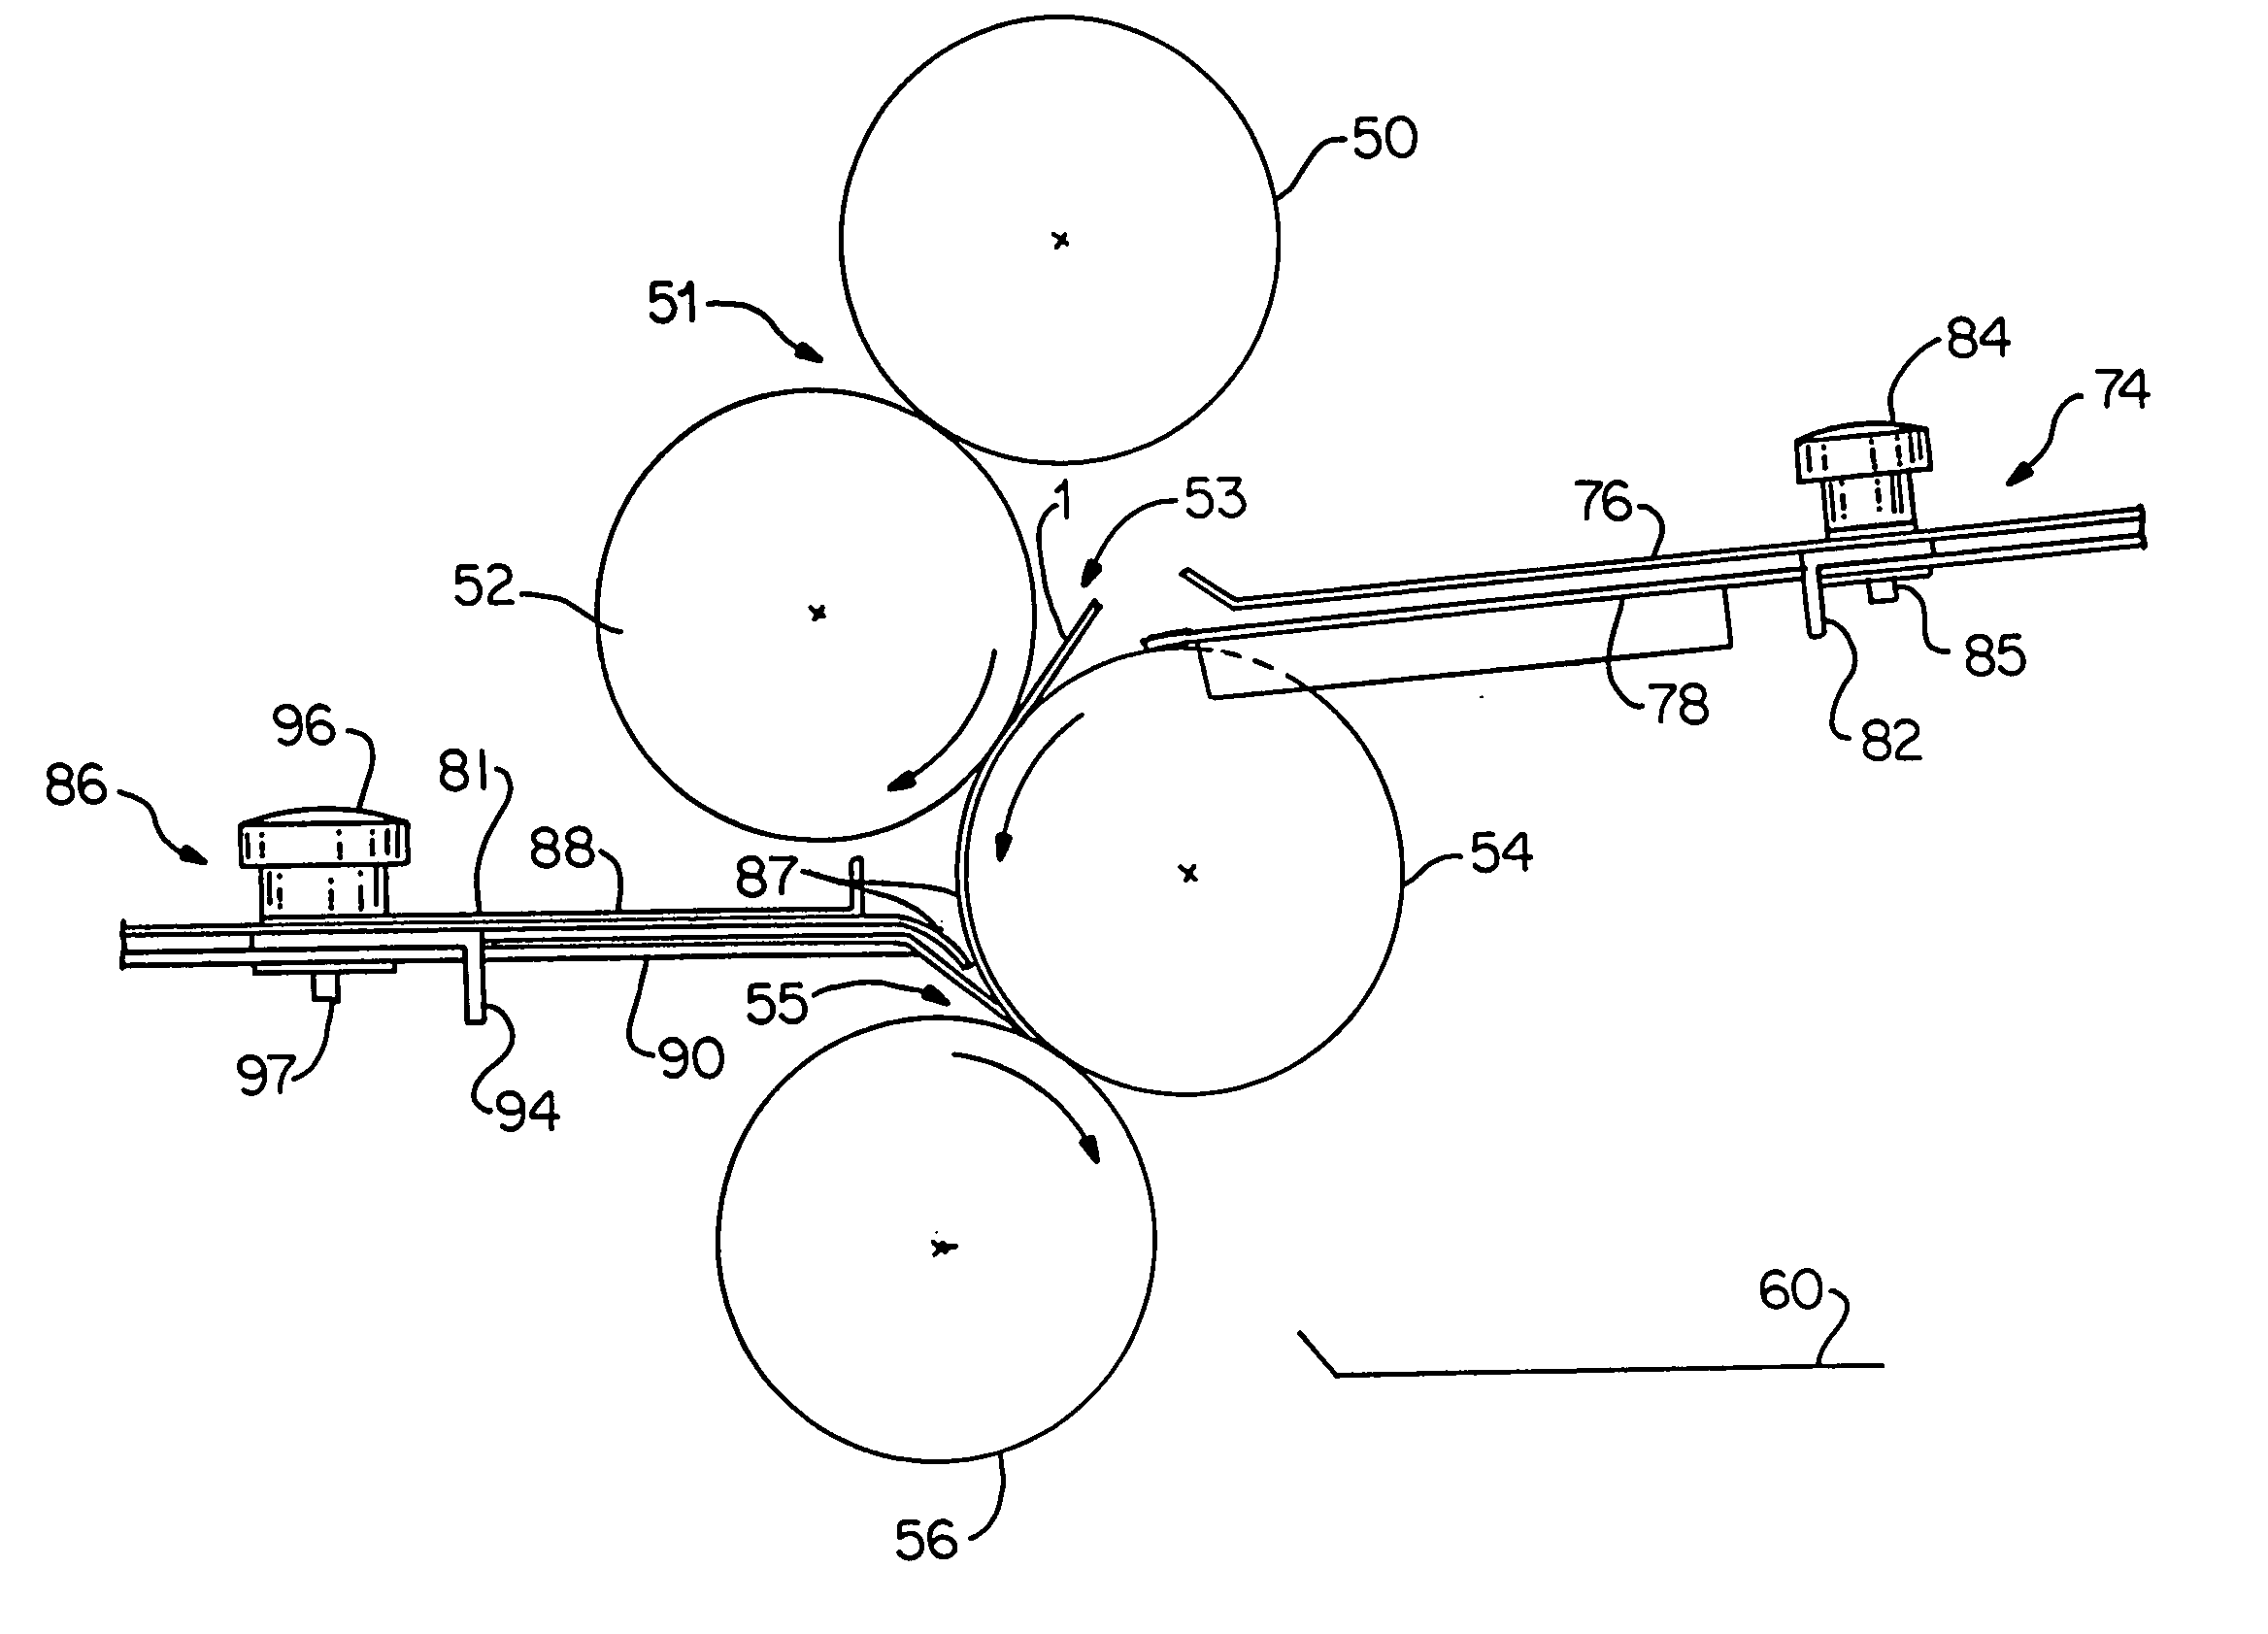 Automated fold and seal apparatus